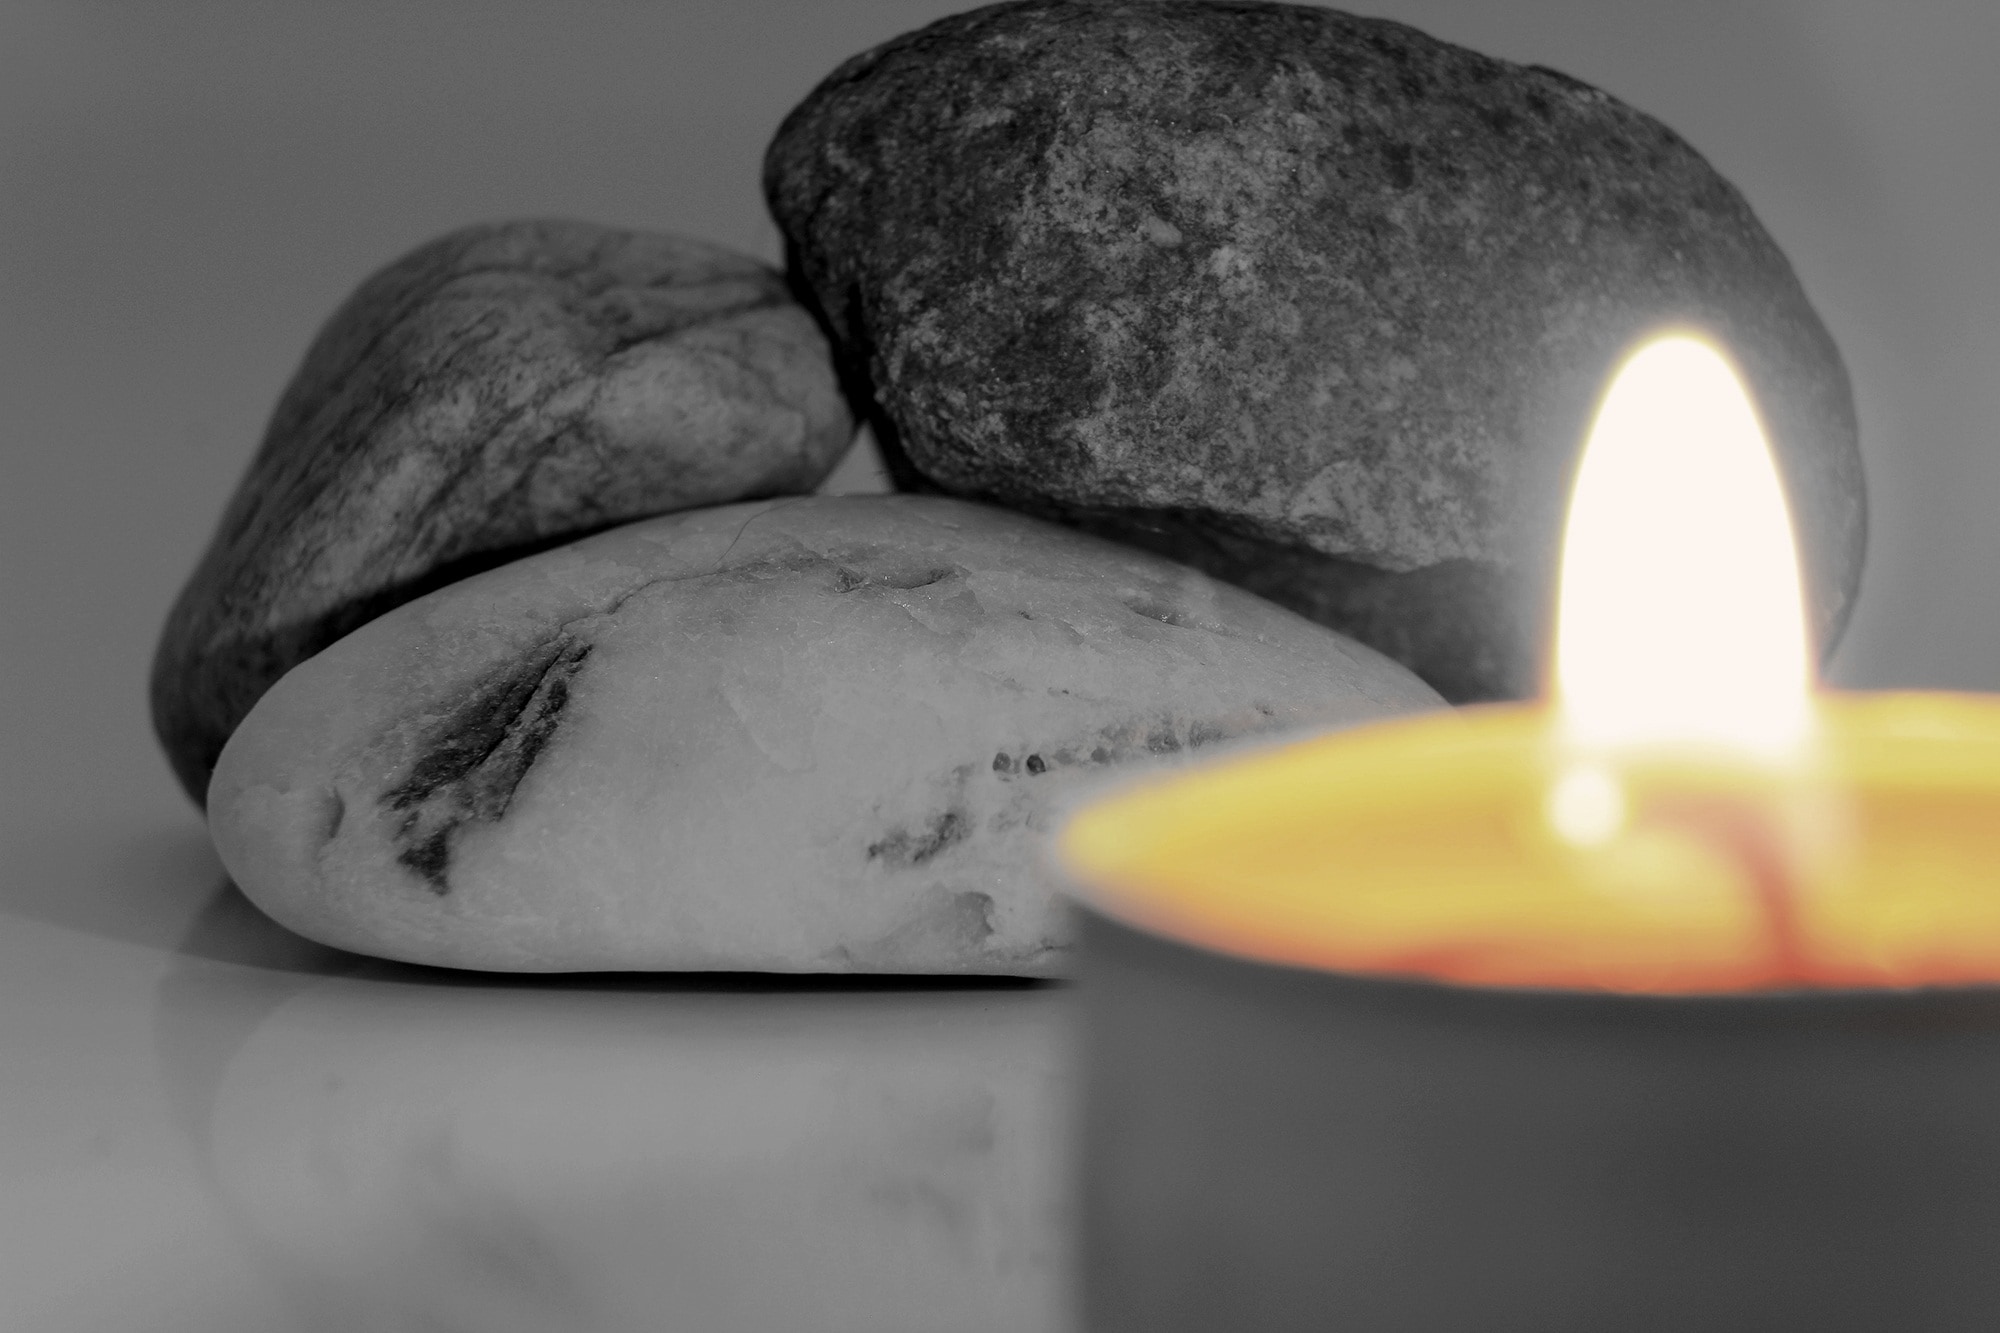 three stone near lighted candle